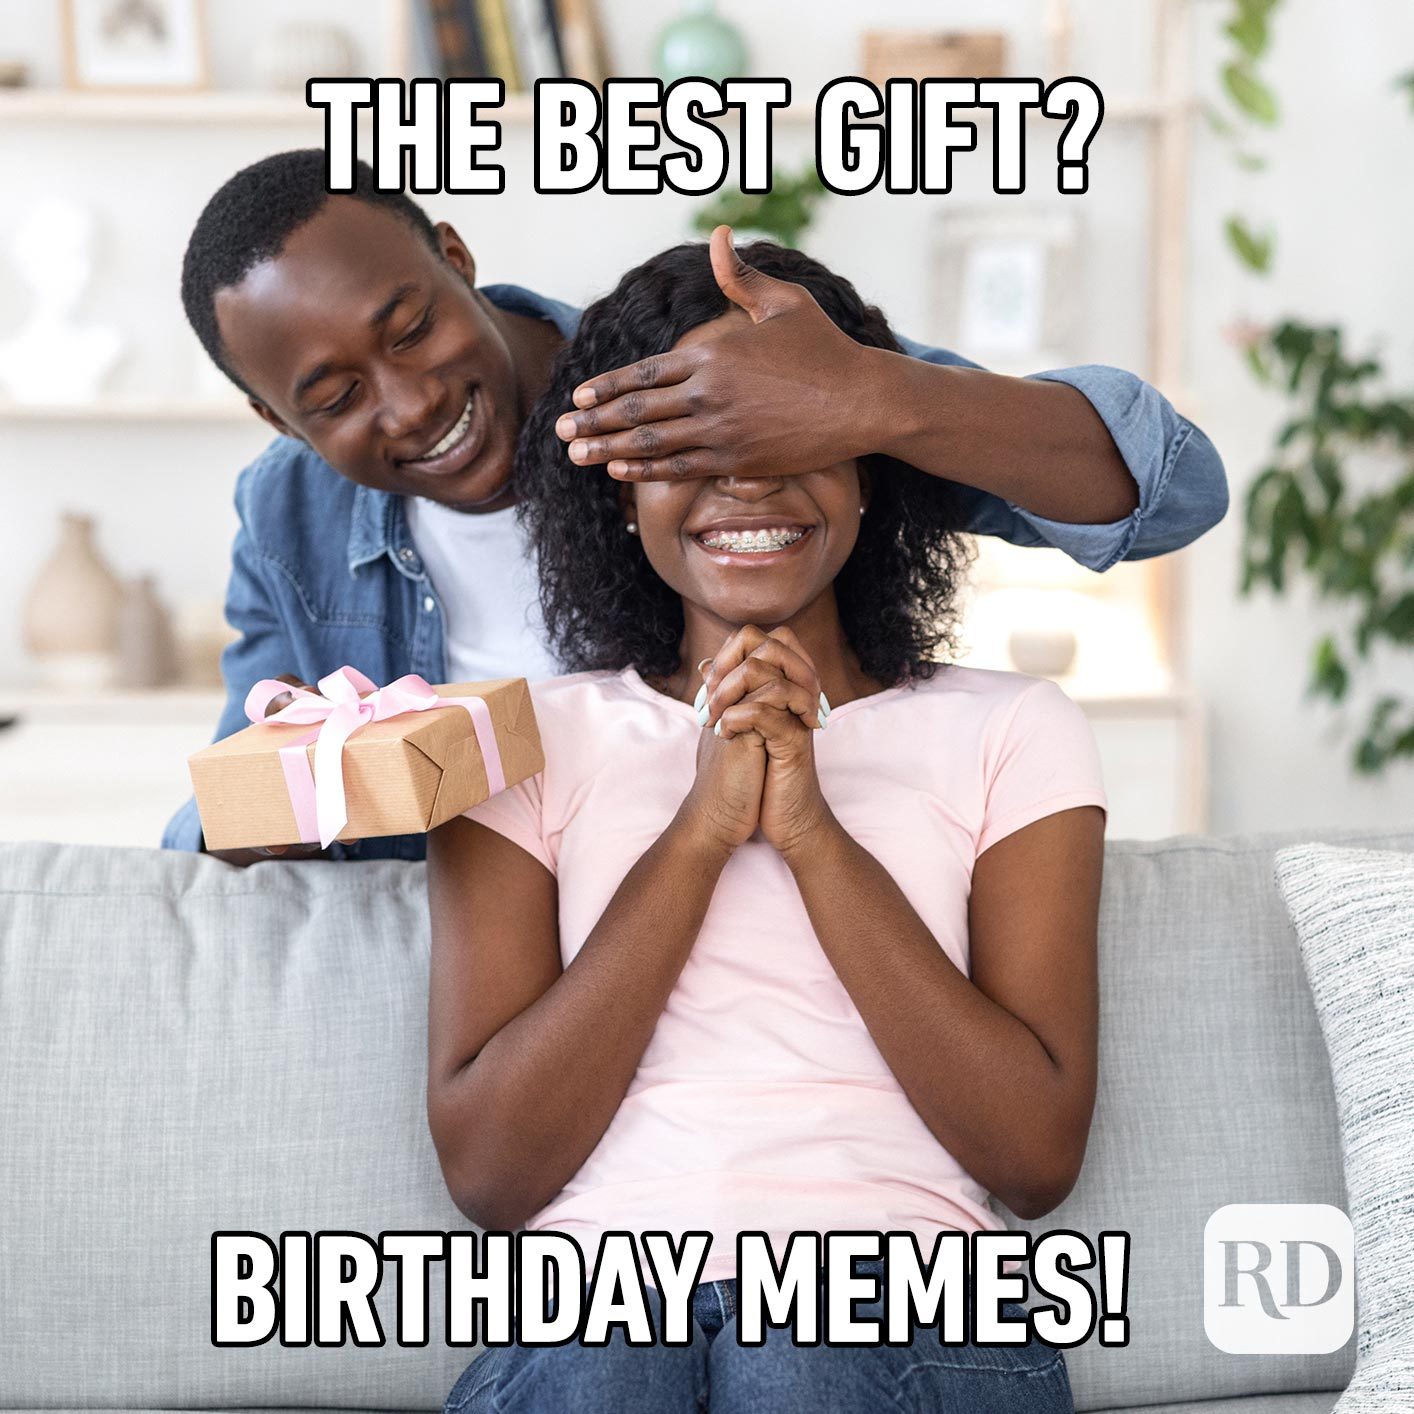 Happy Birthday Meme Love Of The Funniest Happy Birthday Memes The Art Of Images